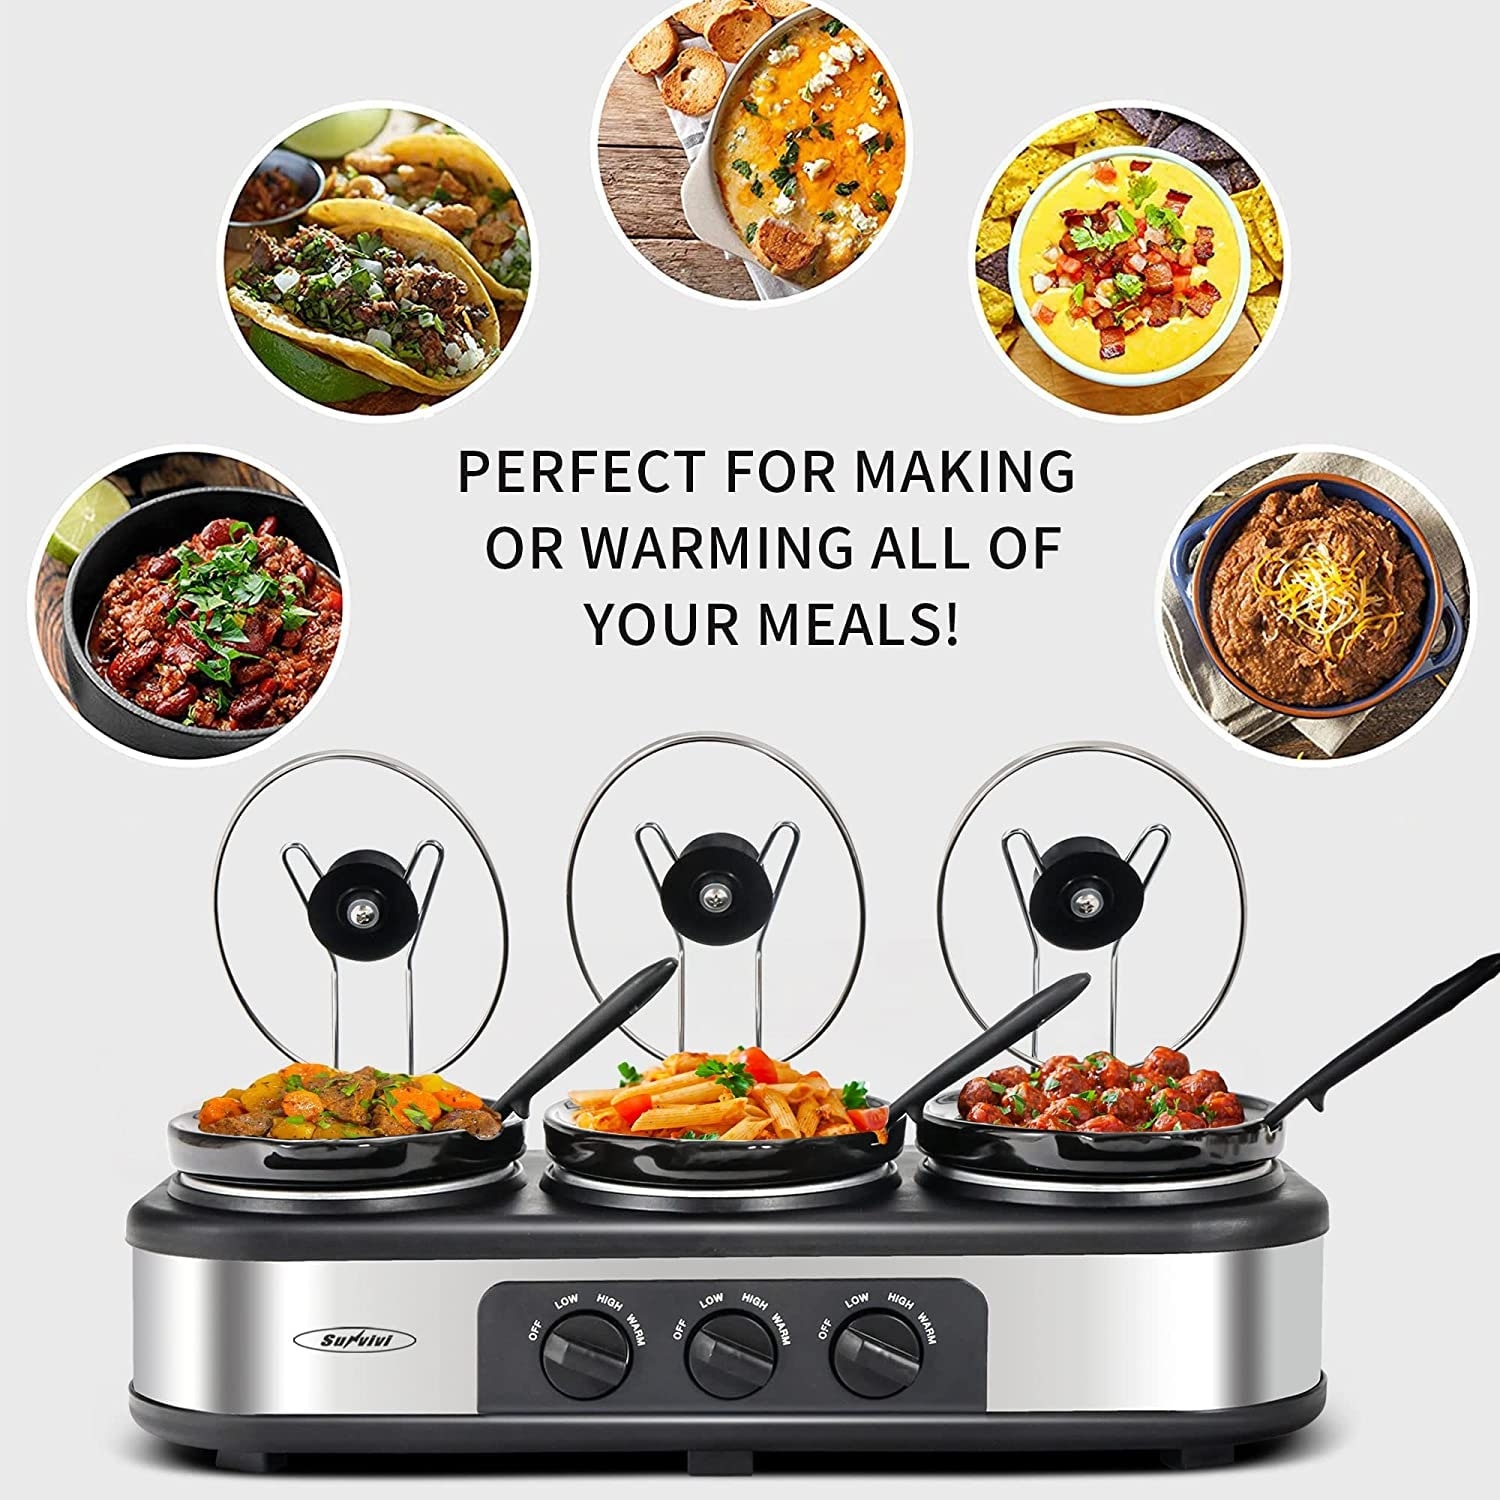 Crock-Pot Trio Cook and Serve Slow Cooker and Food Warmer, Stainless Steel